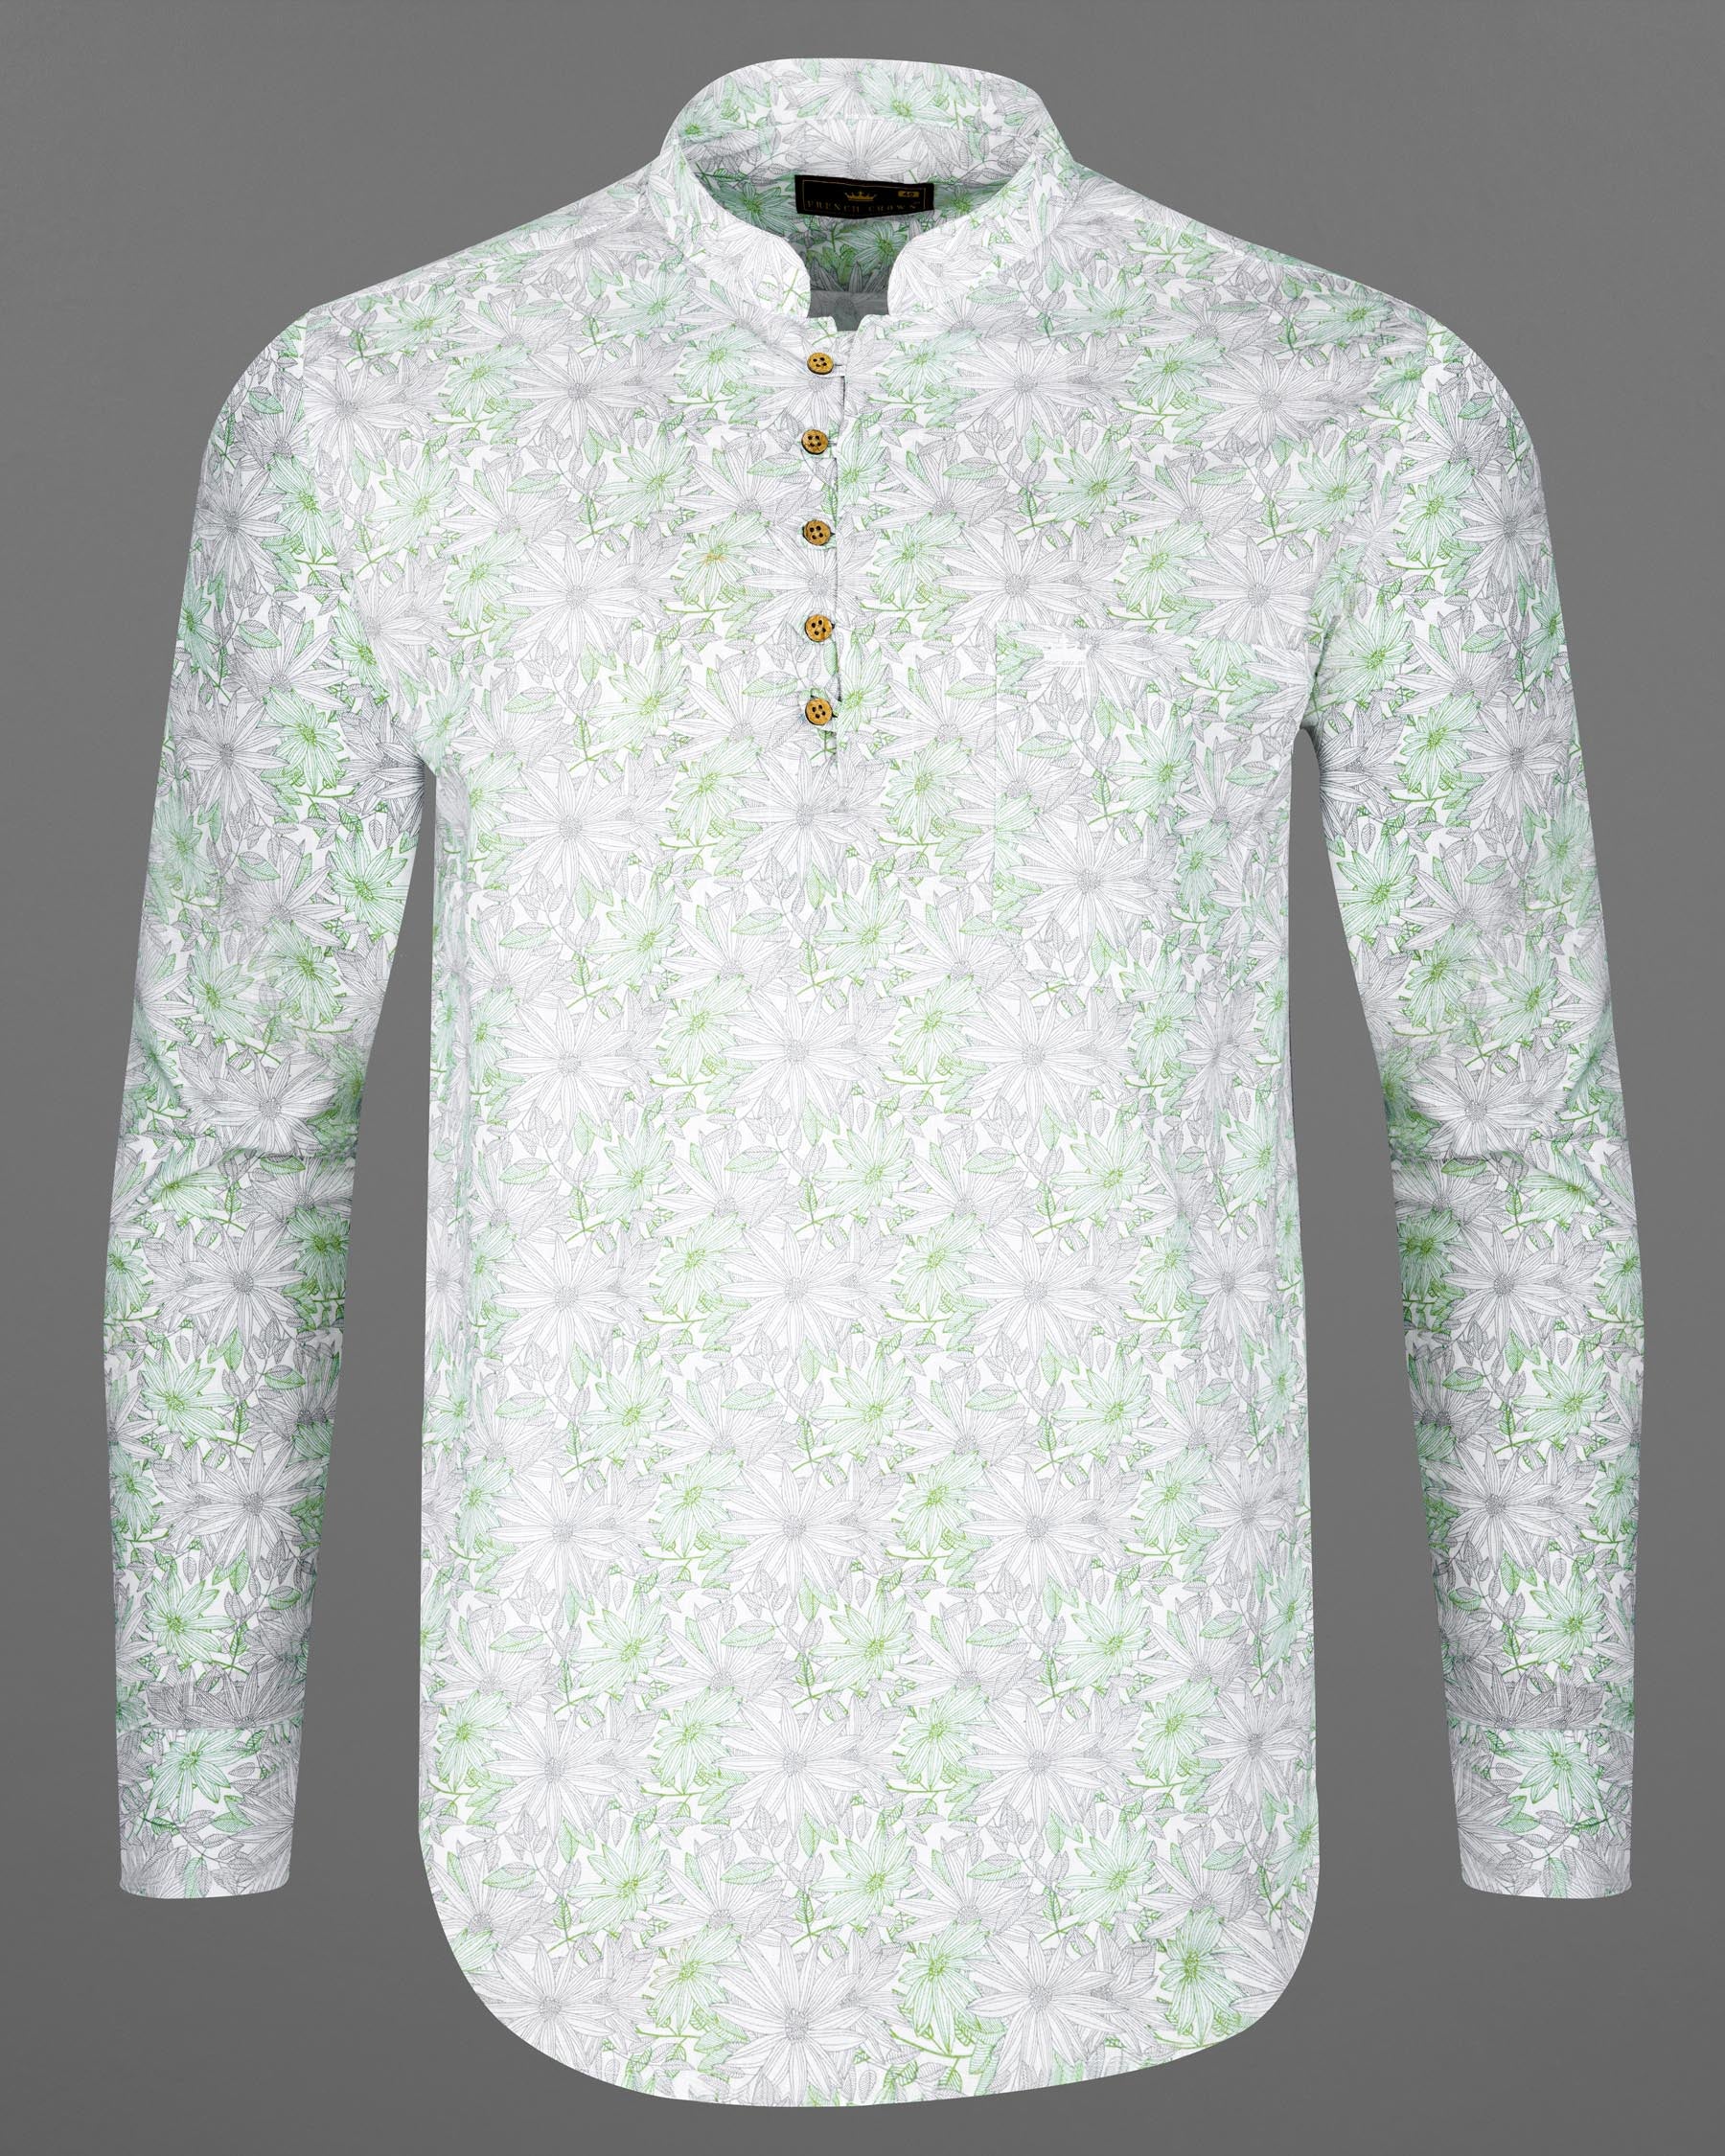 Olivine Green With White Floral Printed Luxurious Linen Kurta Shirt 7933-KS-38, 7933-KS-H-38, 7933-KS-39, 7933-KS-H-39, 7933-KS-40, 7933-KS-H-40, 7933-KS-42, 7933-KS-H-42, 7933-KS-44, 7933-KS-H-44, 7933-KS-46, 7933-KS-H-46, 7933-KS-48, 7933-KS-H-48, 7933-KS-50, 7933-KS-H-50, 7933-KS-52, 7933-KS-H-52